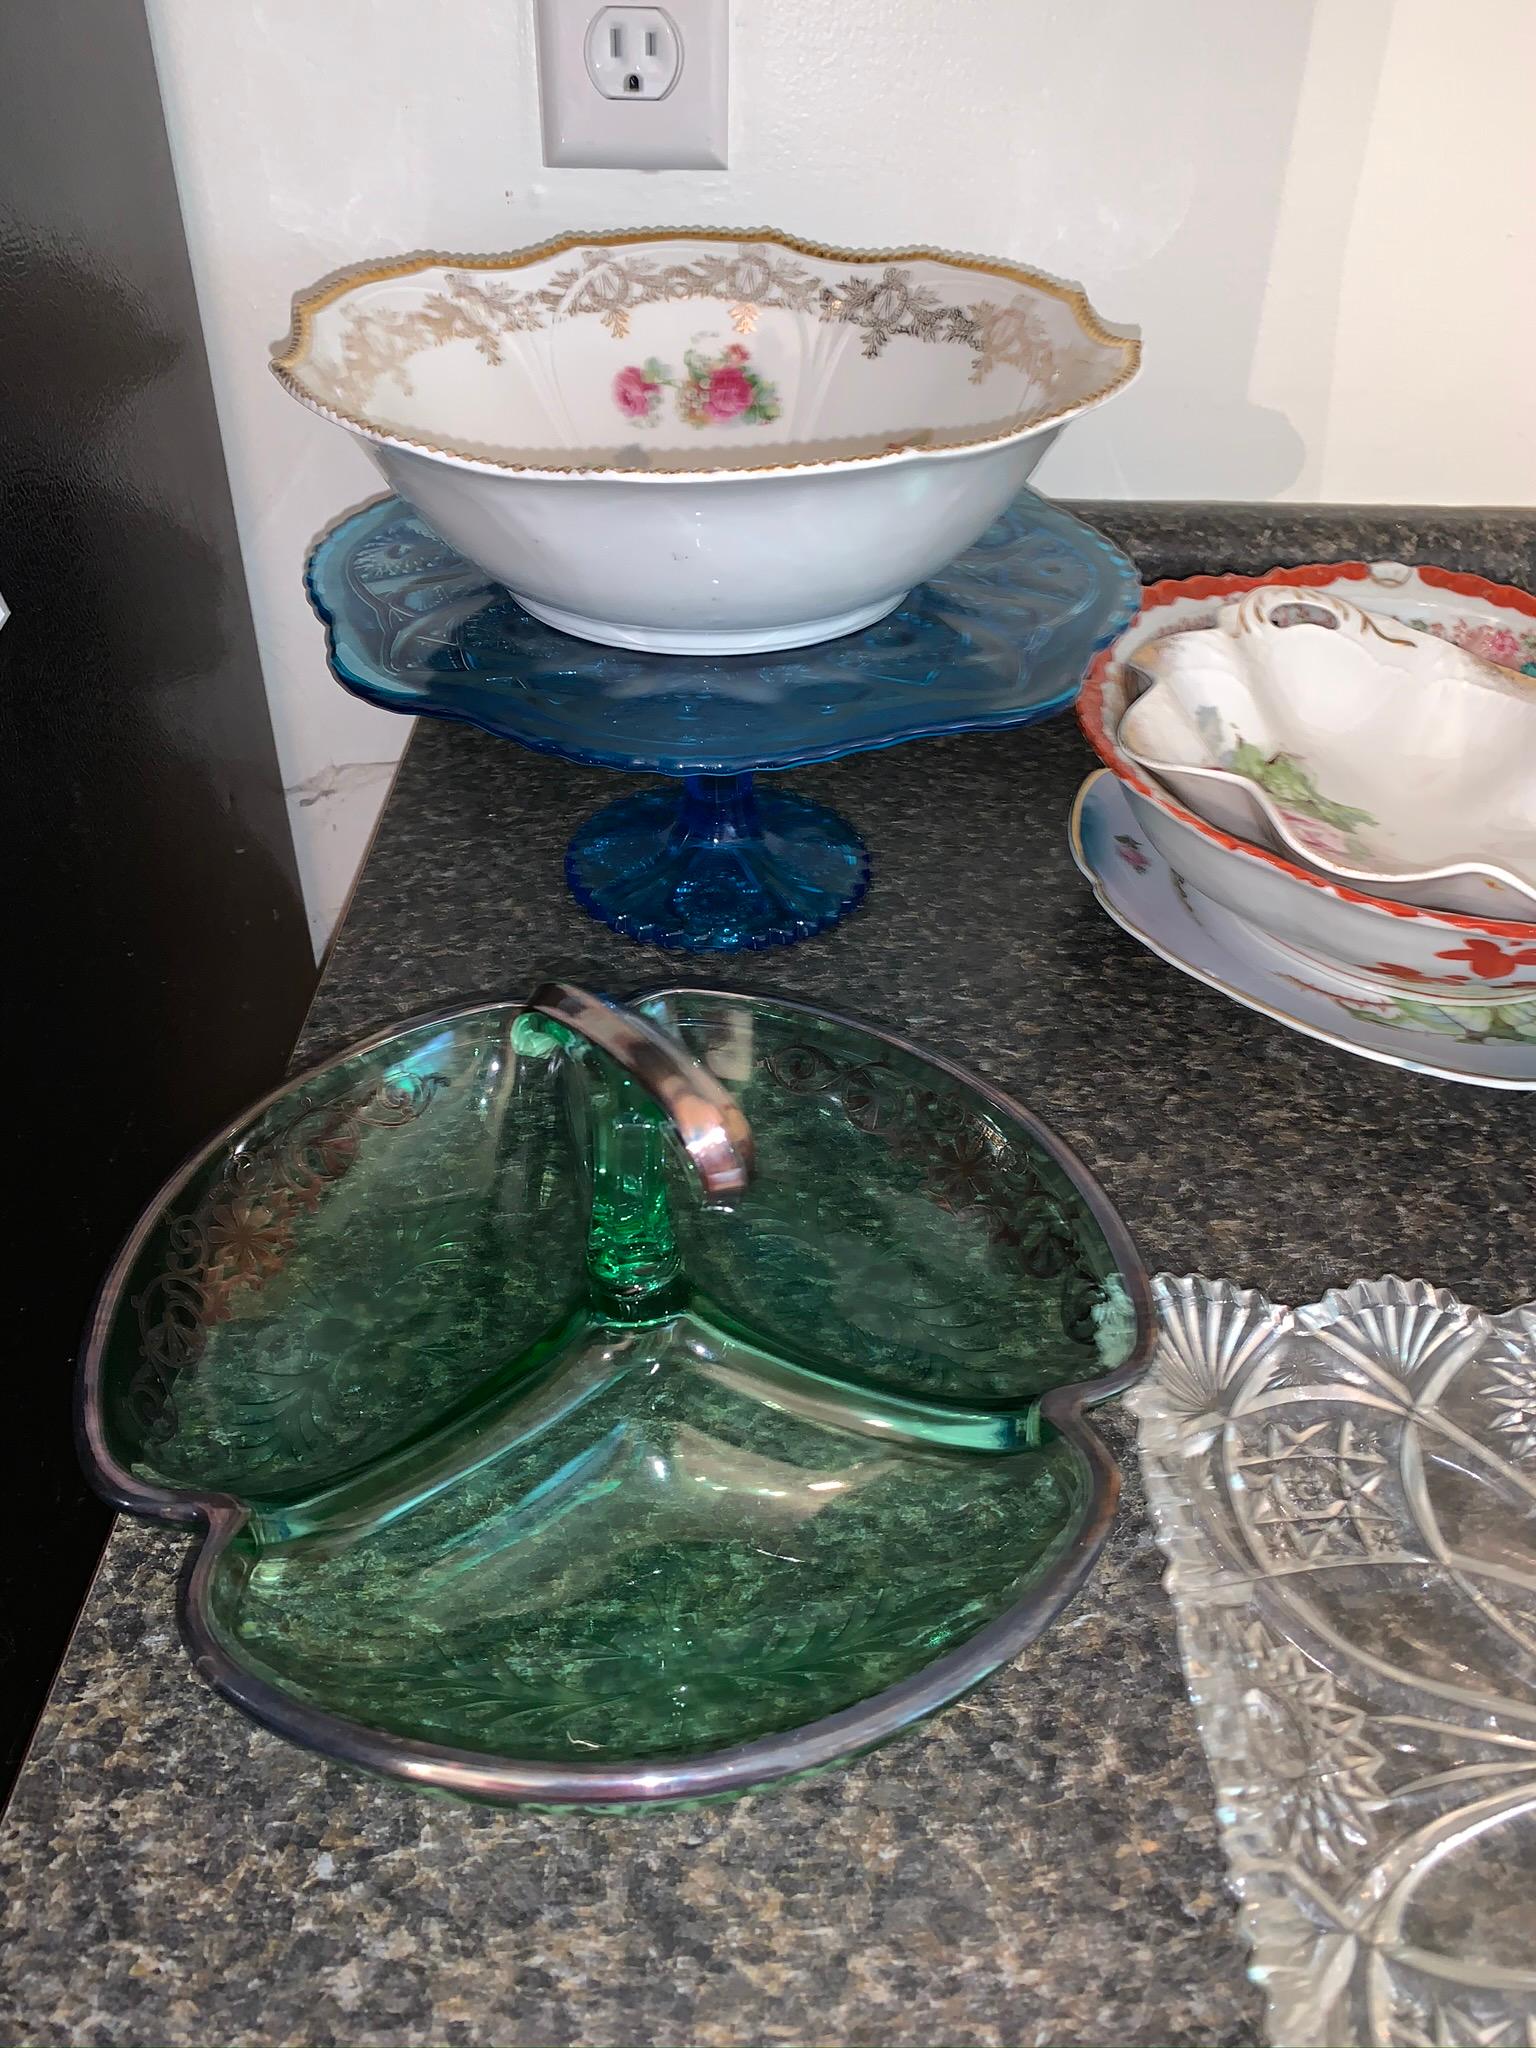 Assorted glassware, step stool, and flatware